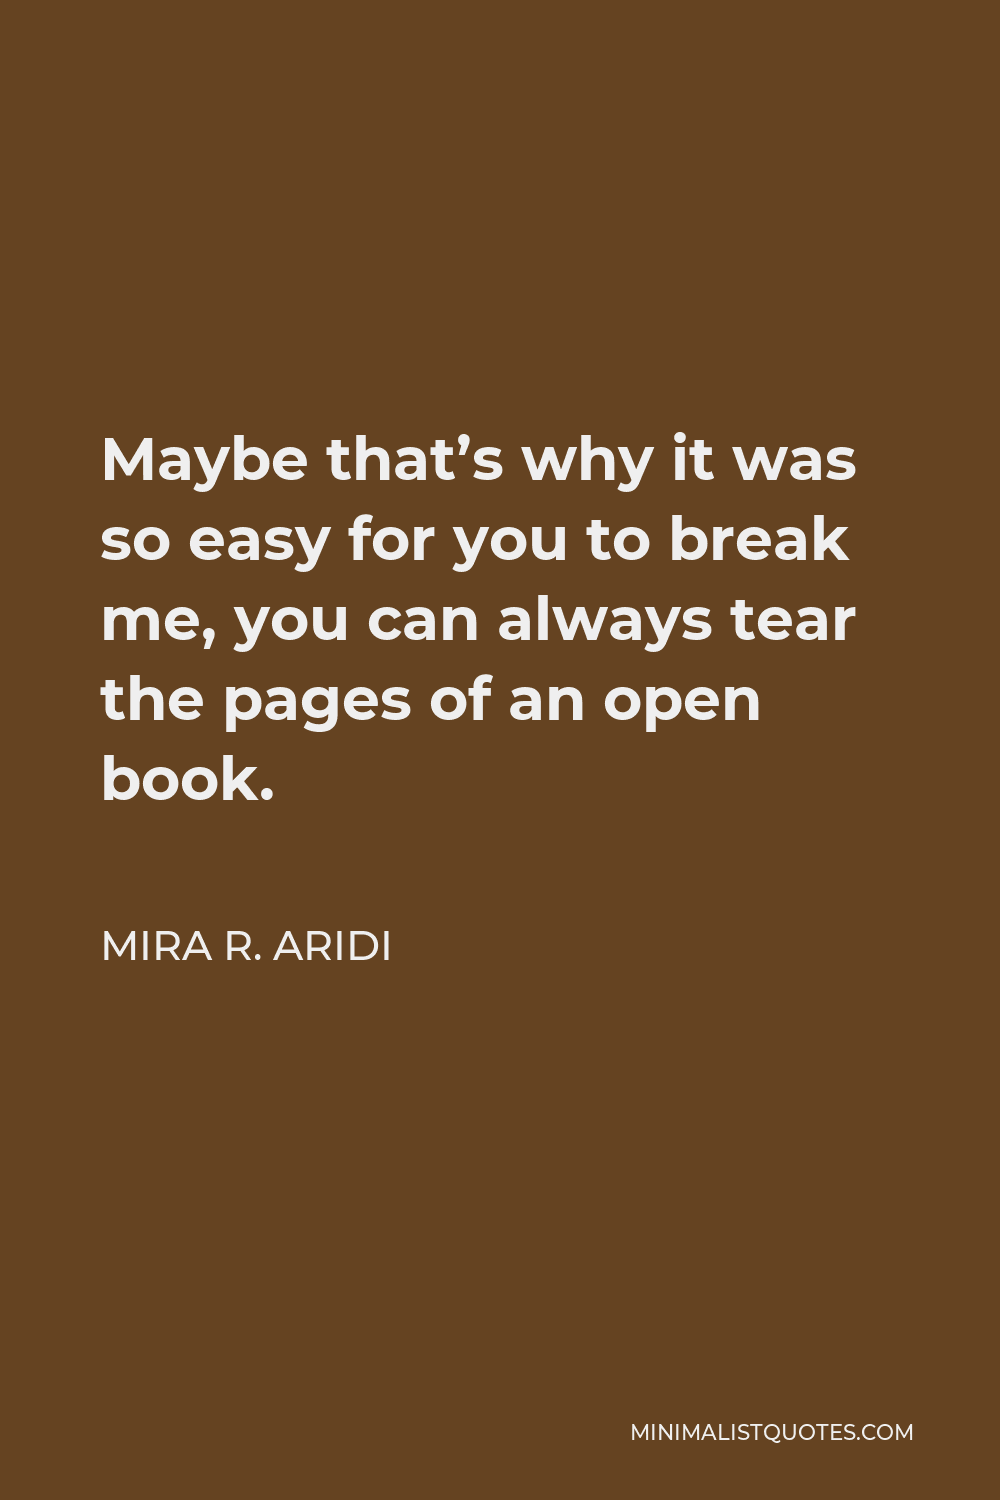 Mira R. Aridi Quote - Maybe that’s why it was so easy for you to break me, you can always tear the pages of an open book.